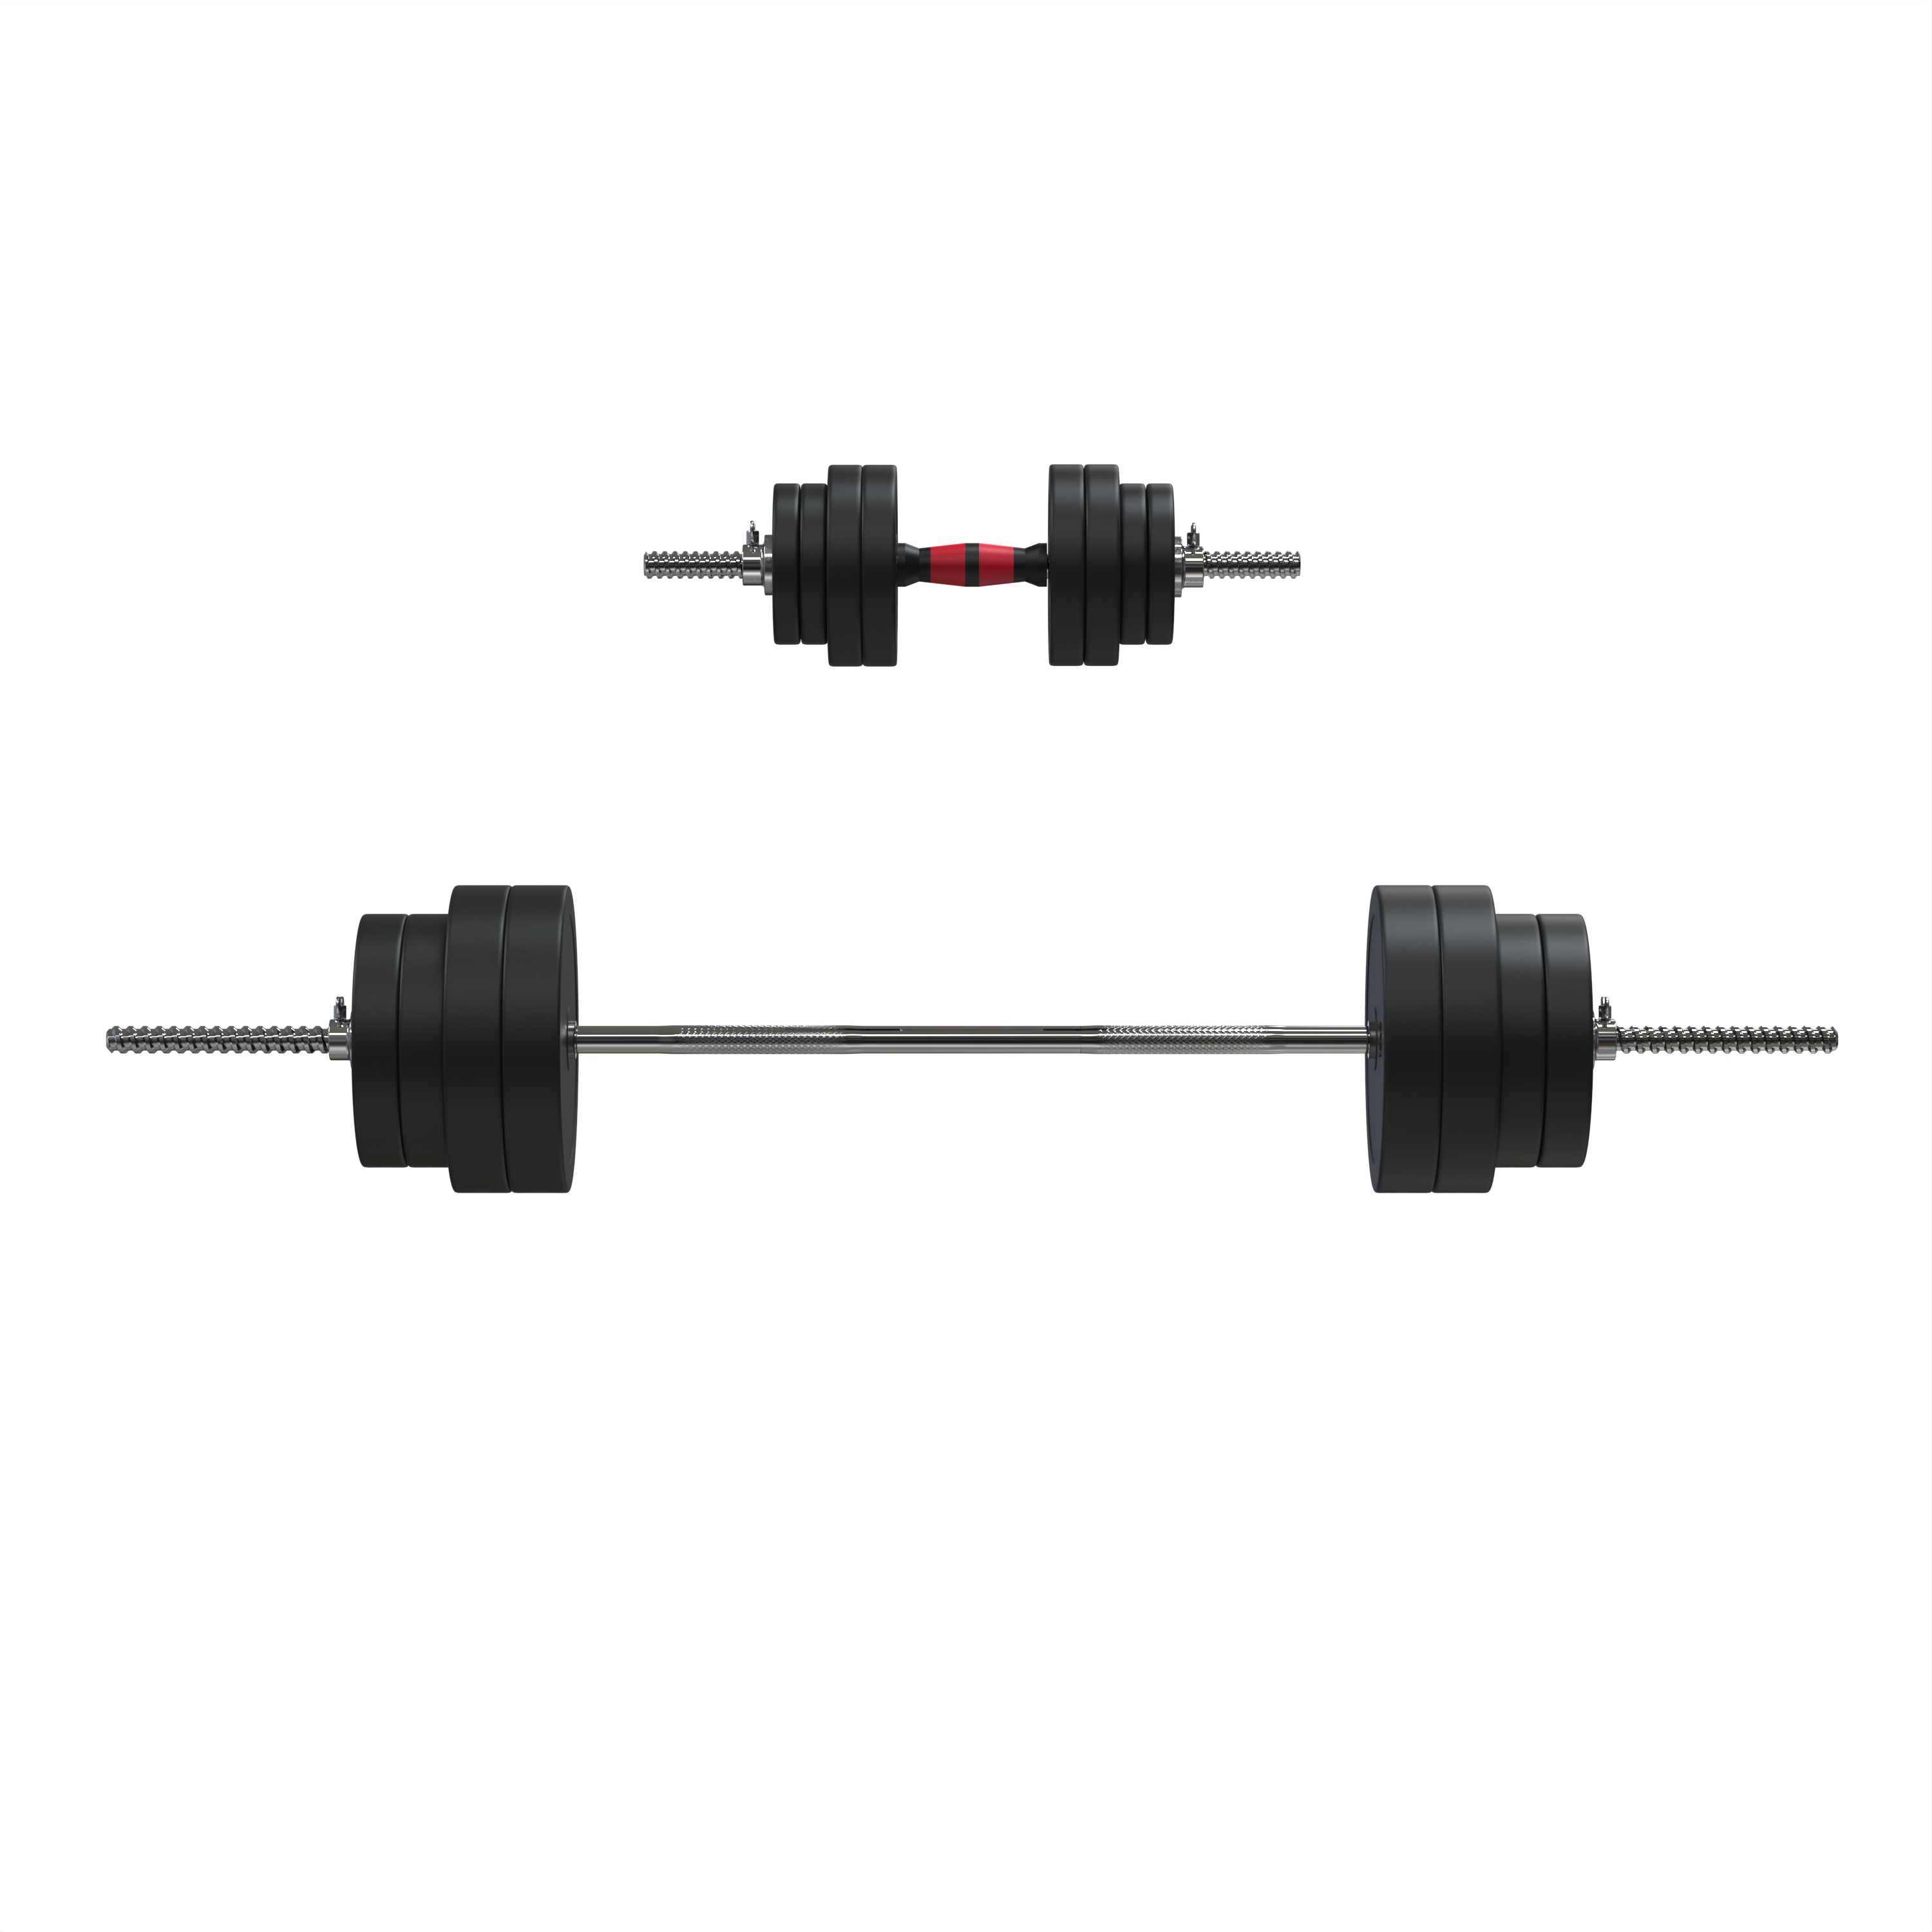 FitRx SmartBell Gym 2-in-1 Barbell & Dumbbell Set, Interchangeable Adjustable Dumbbells and Barbell Weight Set, 100lbs., Black - image 3 of 12